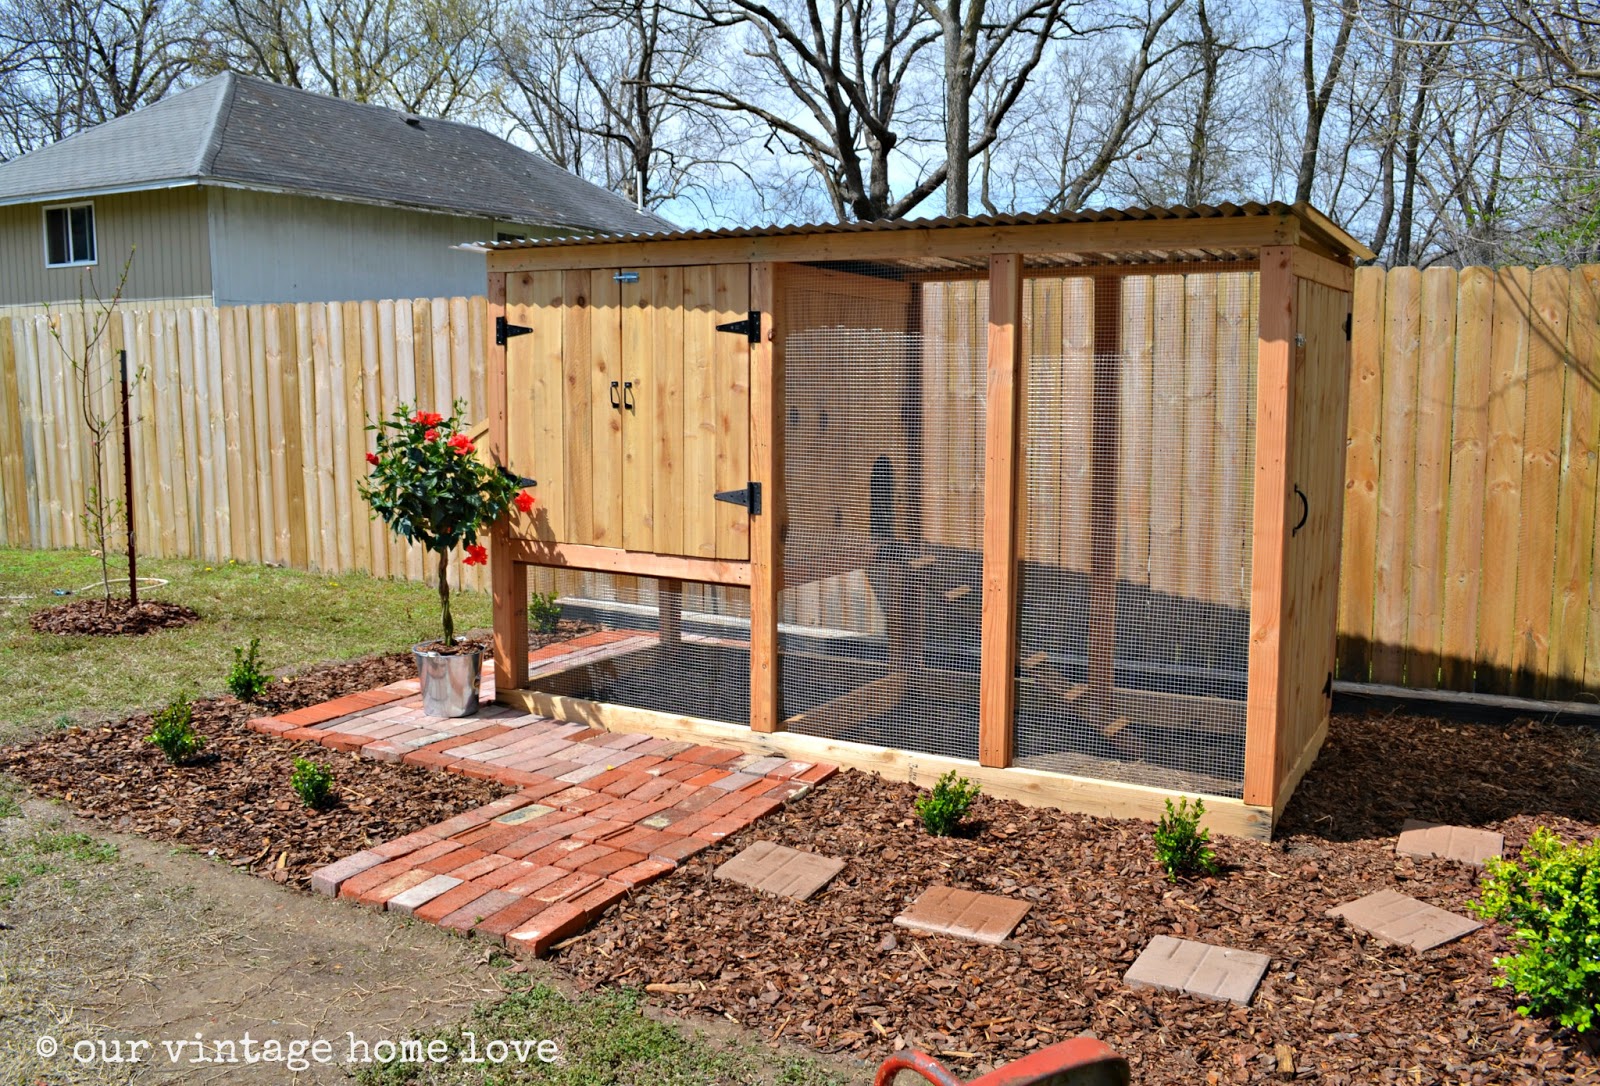 our vintage home love: Our New Coop